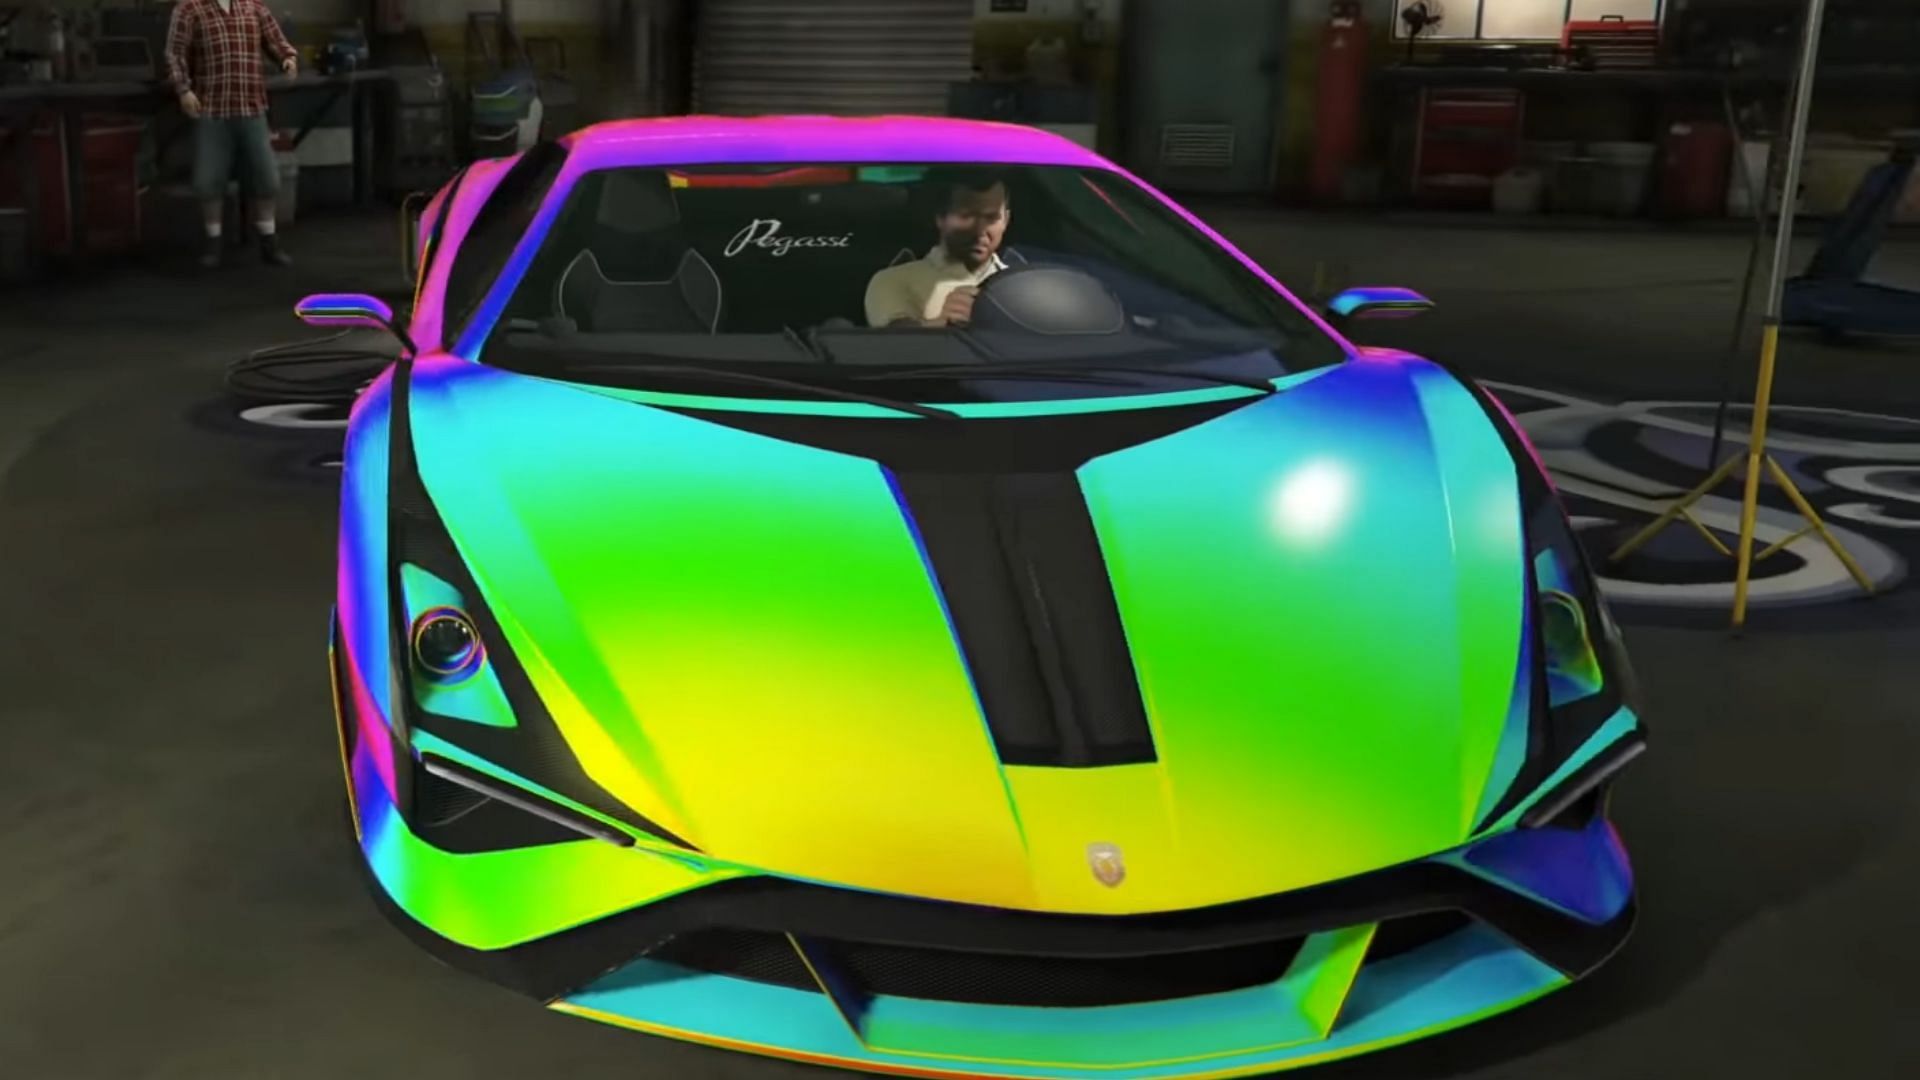 Another example of the upcoming Chameleon paint job (Image via Rockstar Games)